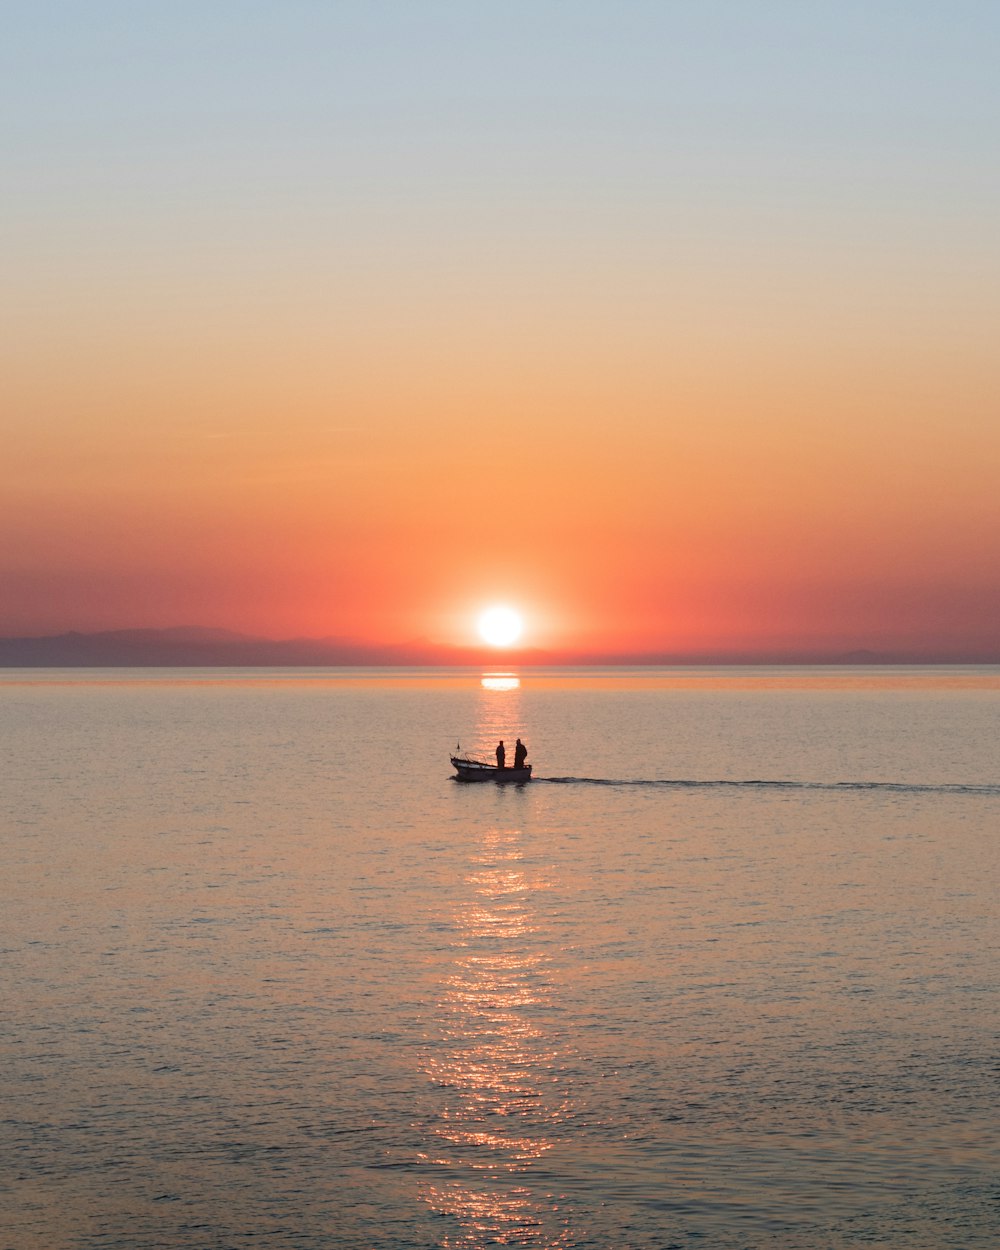 silhouette of 2 people riding on boat on sea during sunset